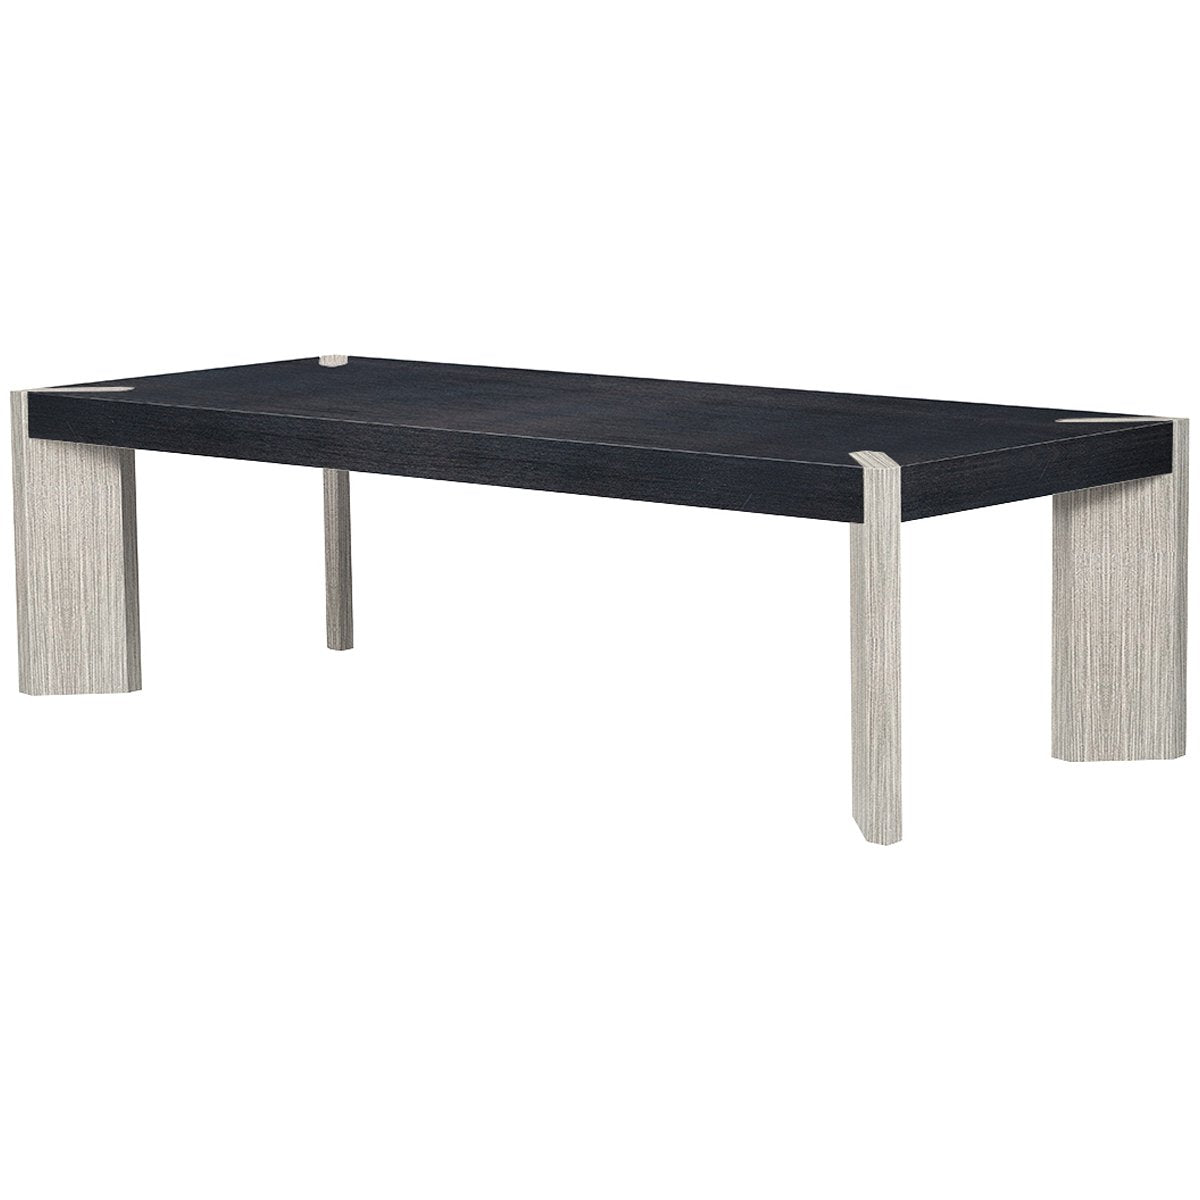 Belle Meade Signature Henley Dining Table